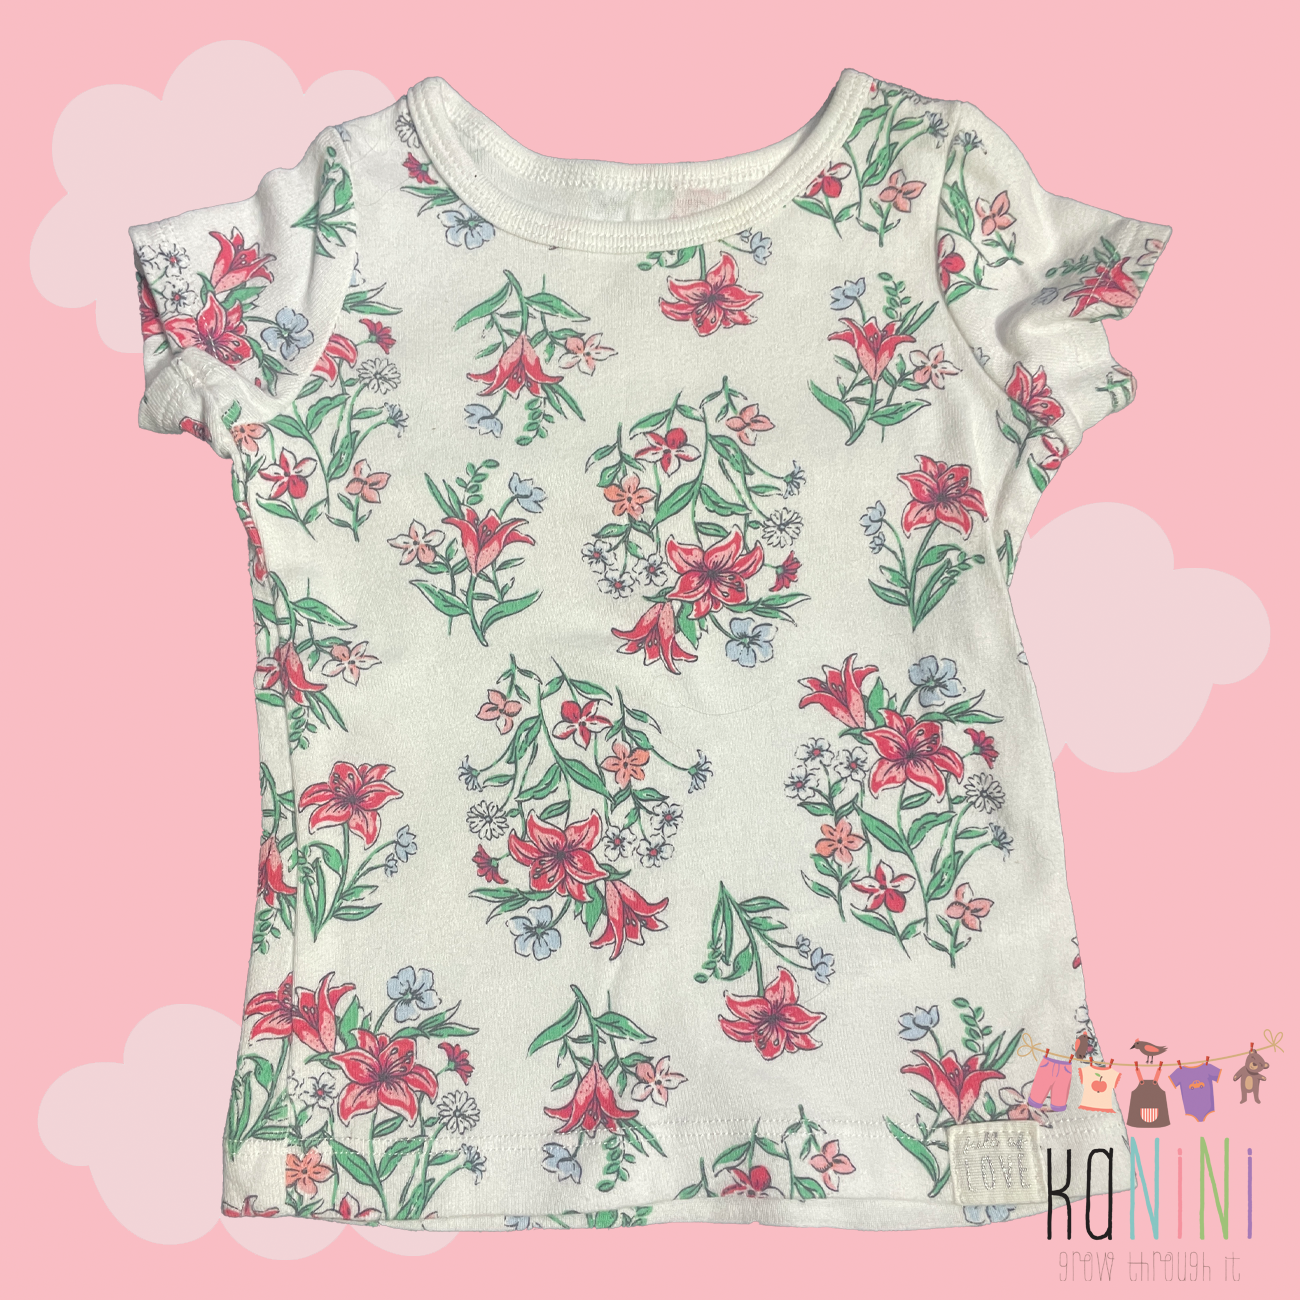 Featured image for “Carter's 6 Months Girls Floral T-Shirt”